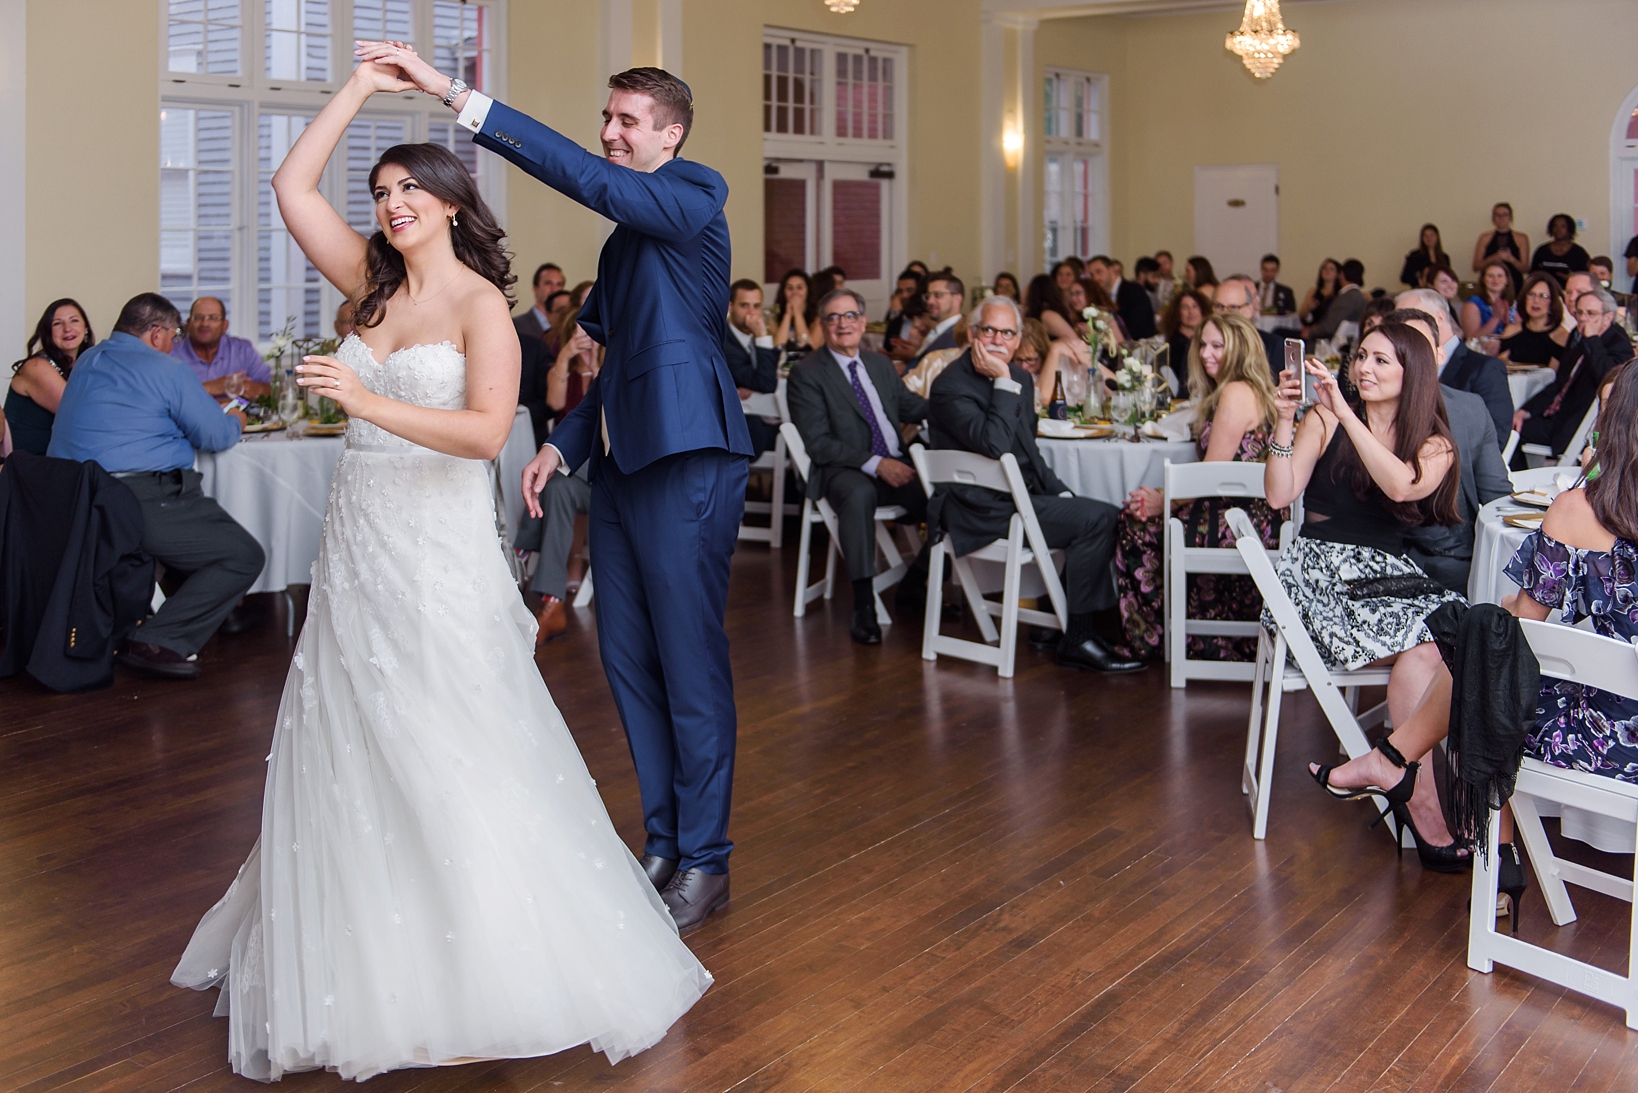 Bride being twirled by the Groom during their first dance by Sarah & Ben Photography